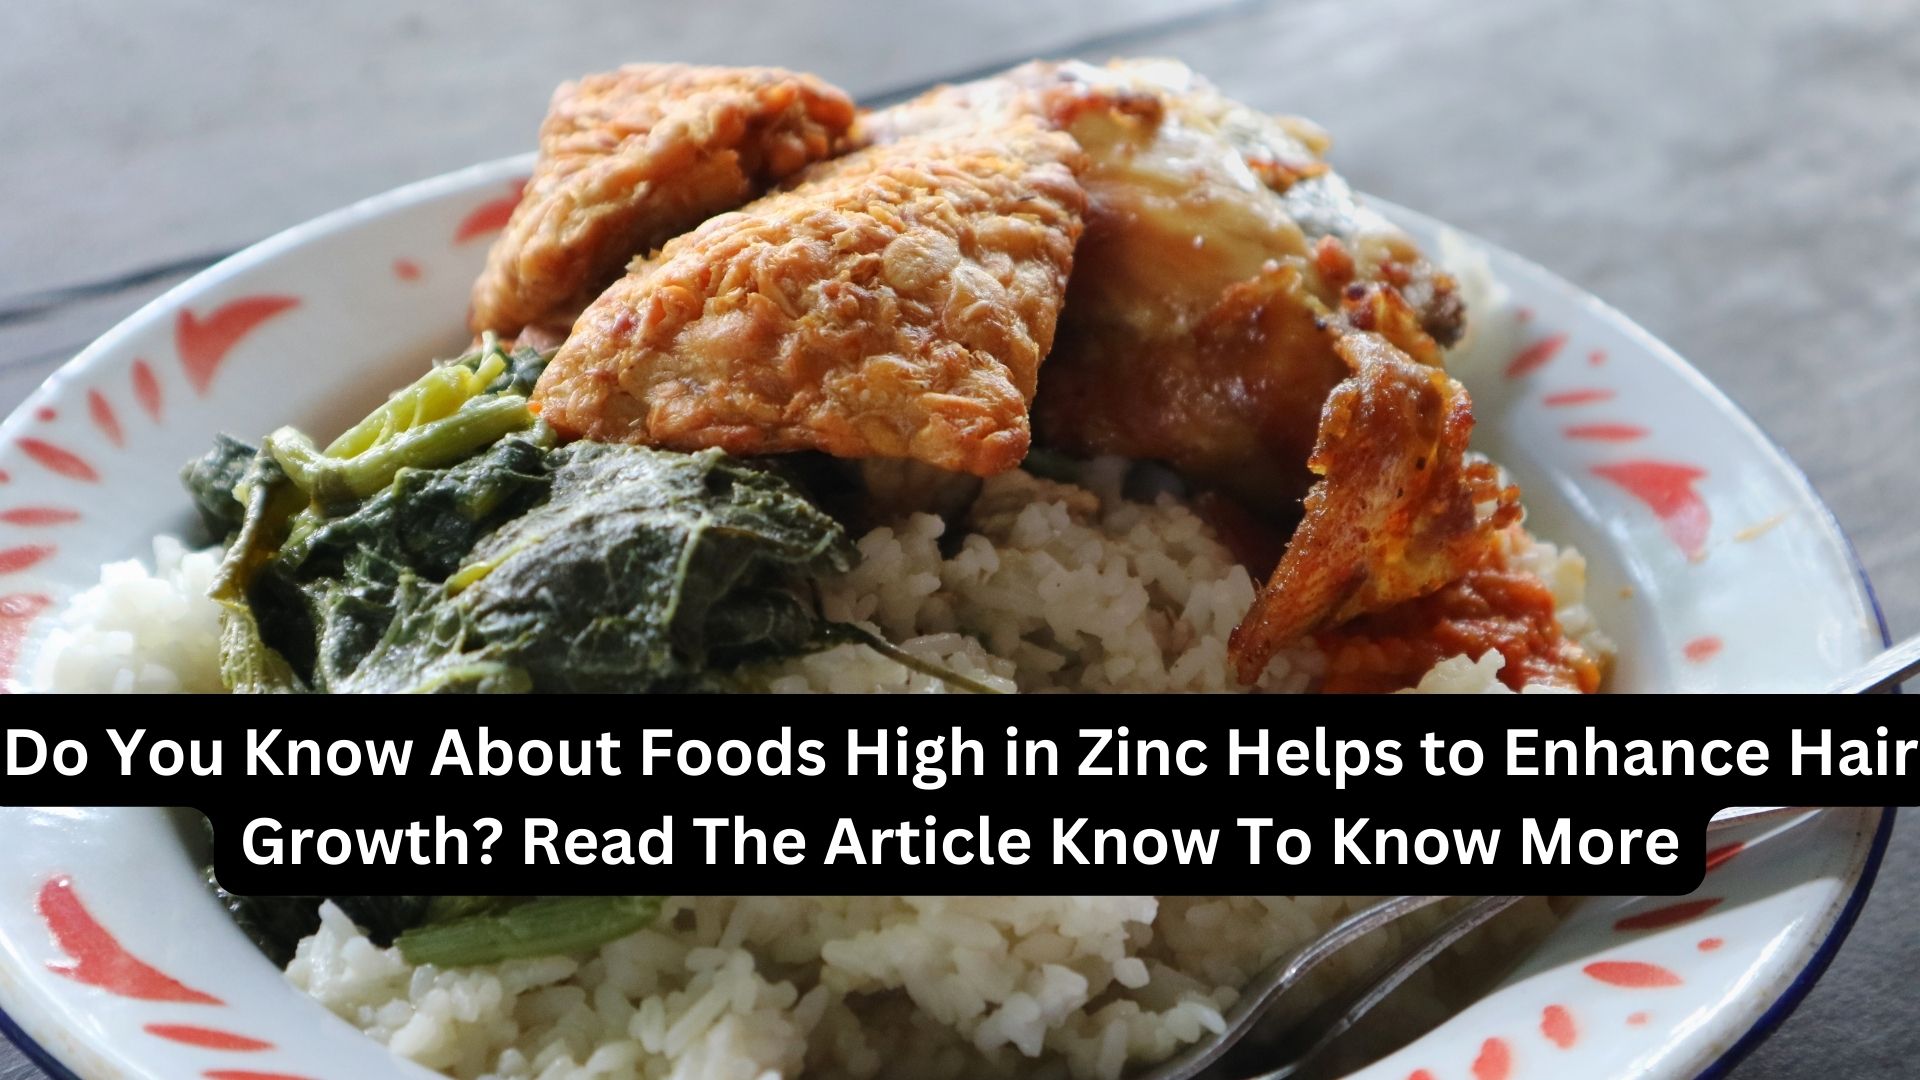 Do You Know About Foods High in Zinc Helps to Enhance Hair Growth? Read The Article Know To Know More